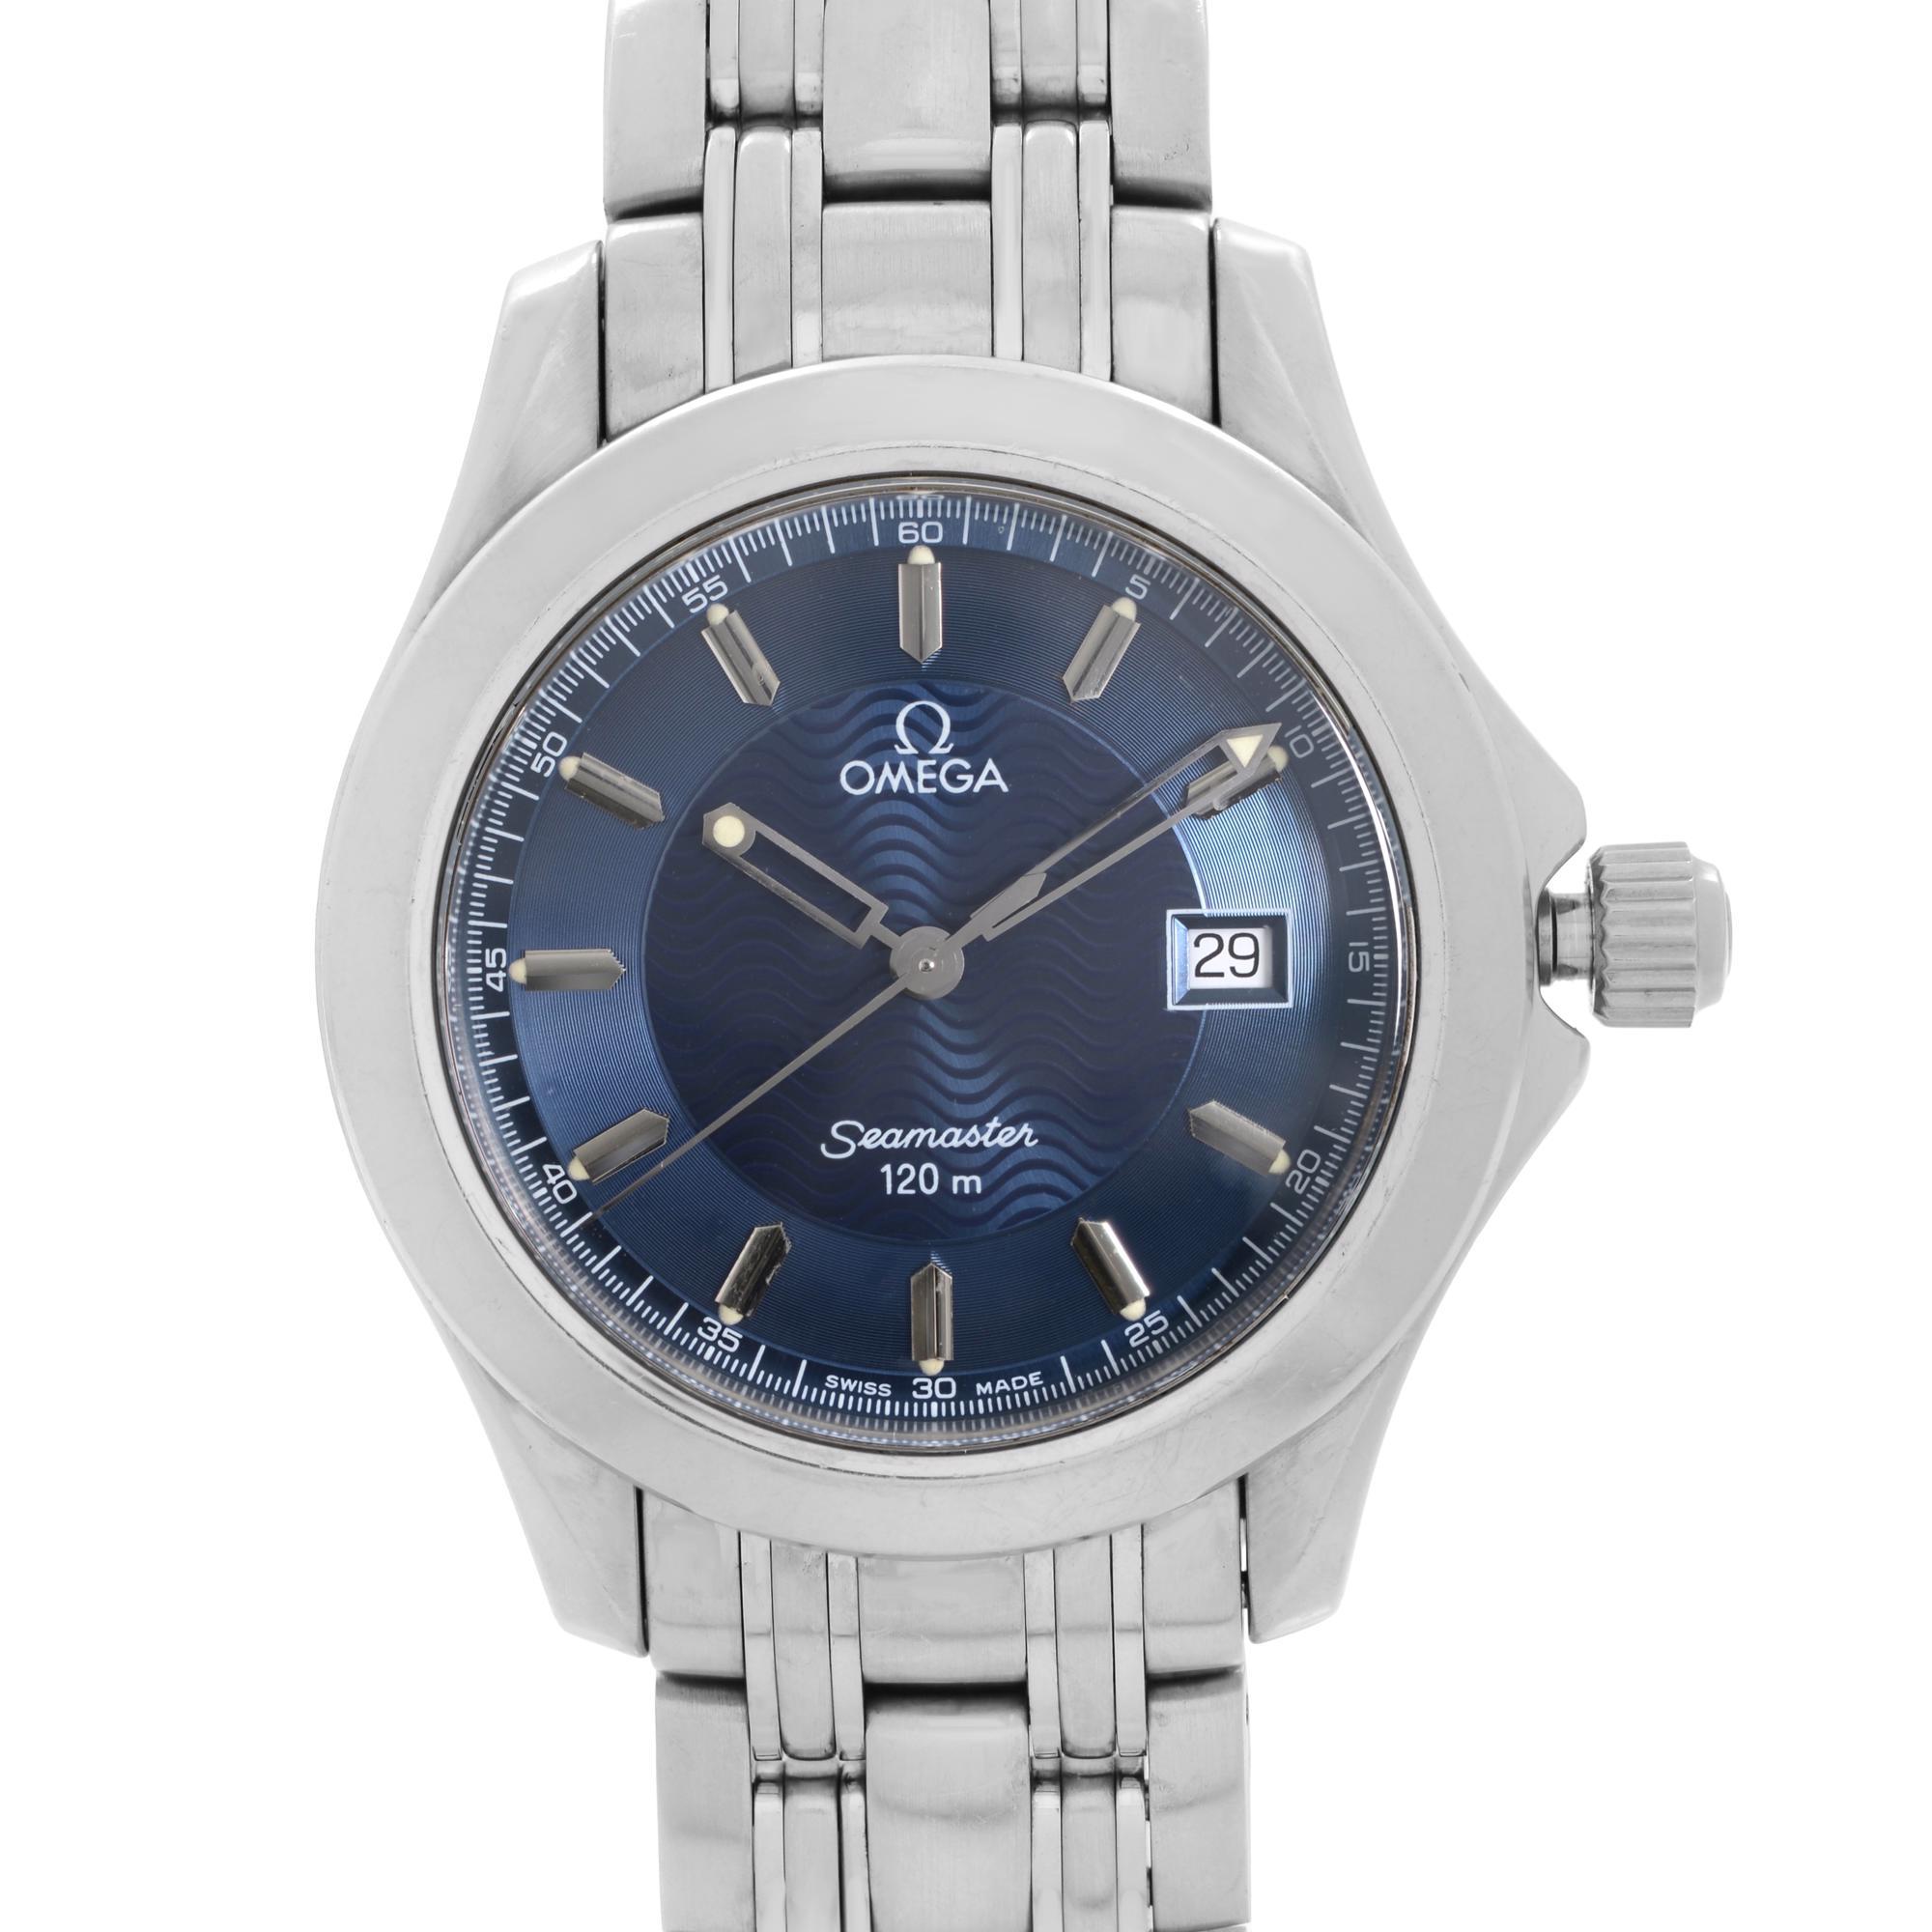 Pre-owned Vintage Omega Seamaster 120 36mm Steel Blue Dial Mens Quartz Watch 2511.81.00.  The Watch Shows Signs Wear. This Beautiful Timepiece is Powered by a Quartz (Battery) Movement and Features: Stainless Steel Case & Bracelet, Fixed Stainless